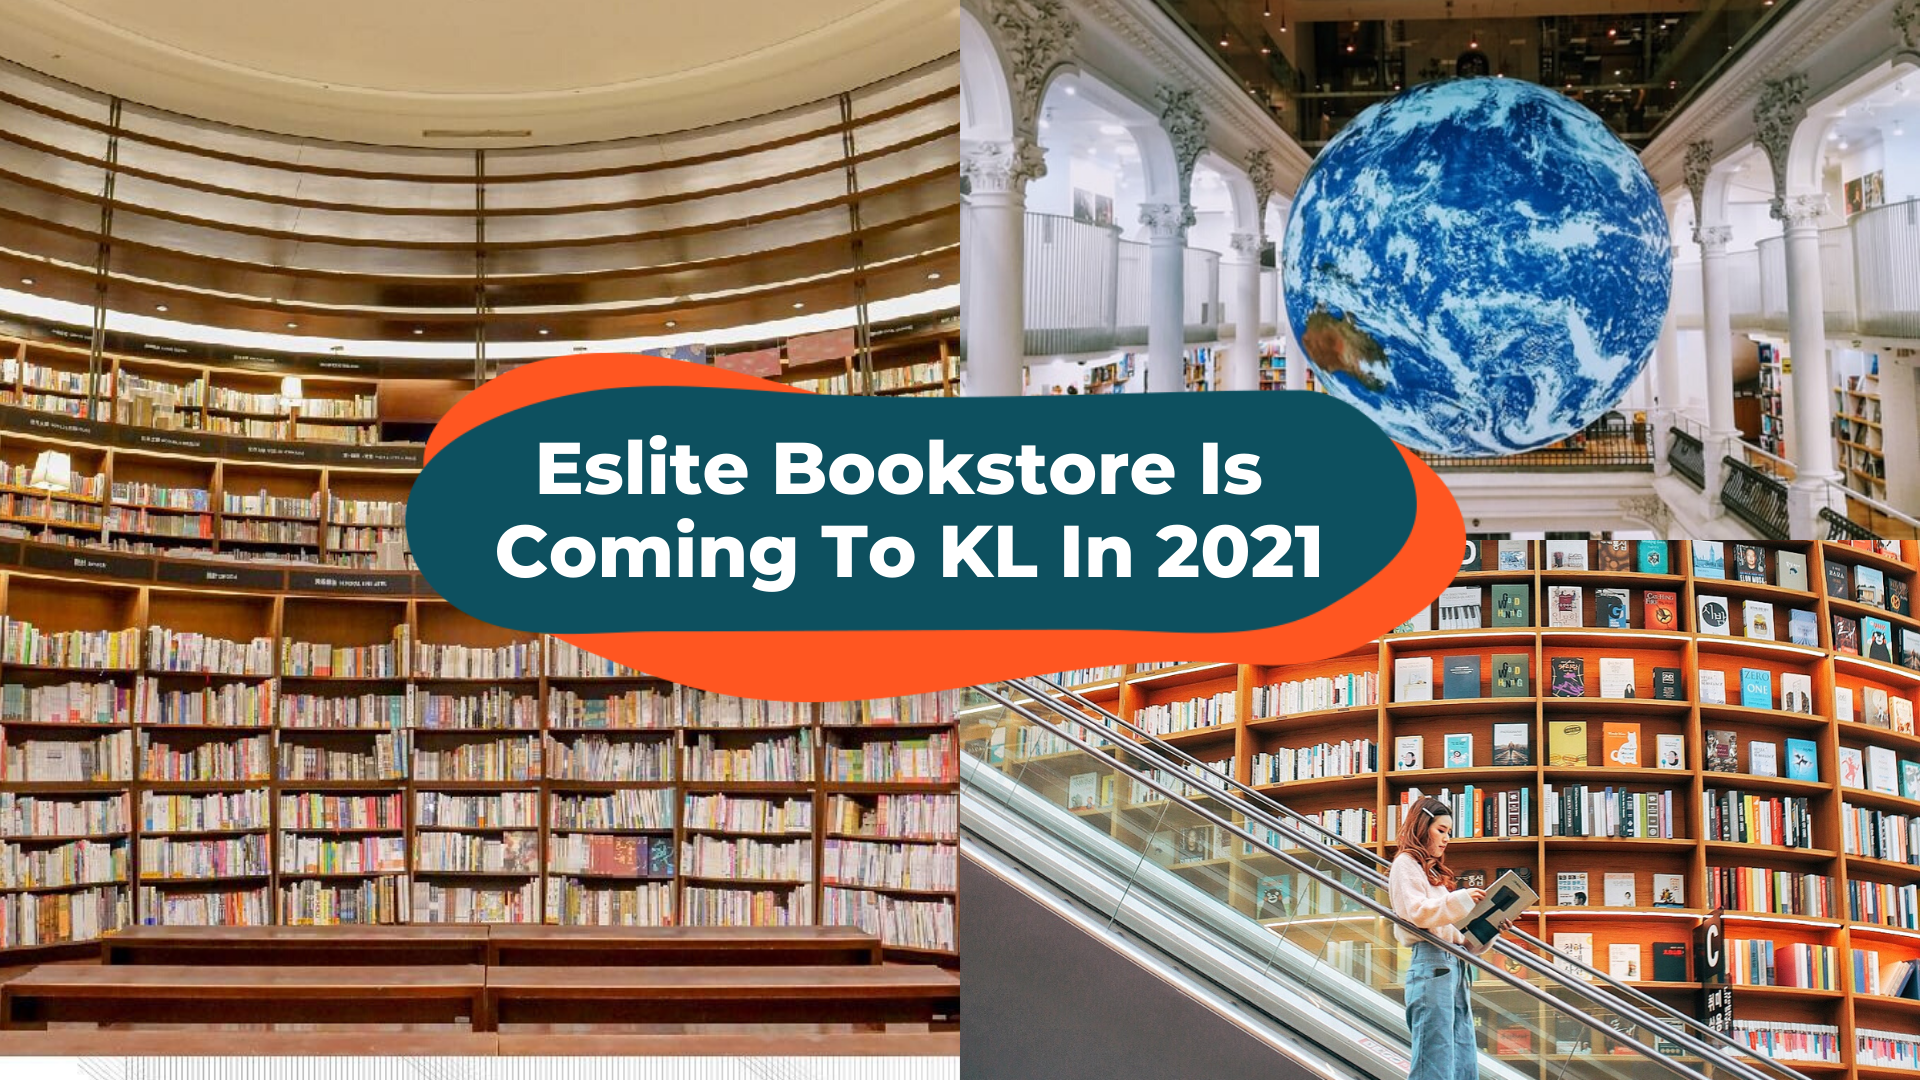 Taiwan S Largest Retail Bookstore Eslite Bookstore Is Coming To Malaysia In 2021 Klook Travel Blog